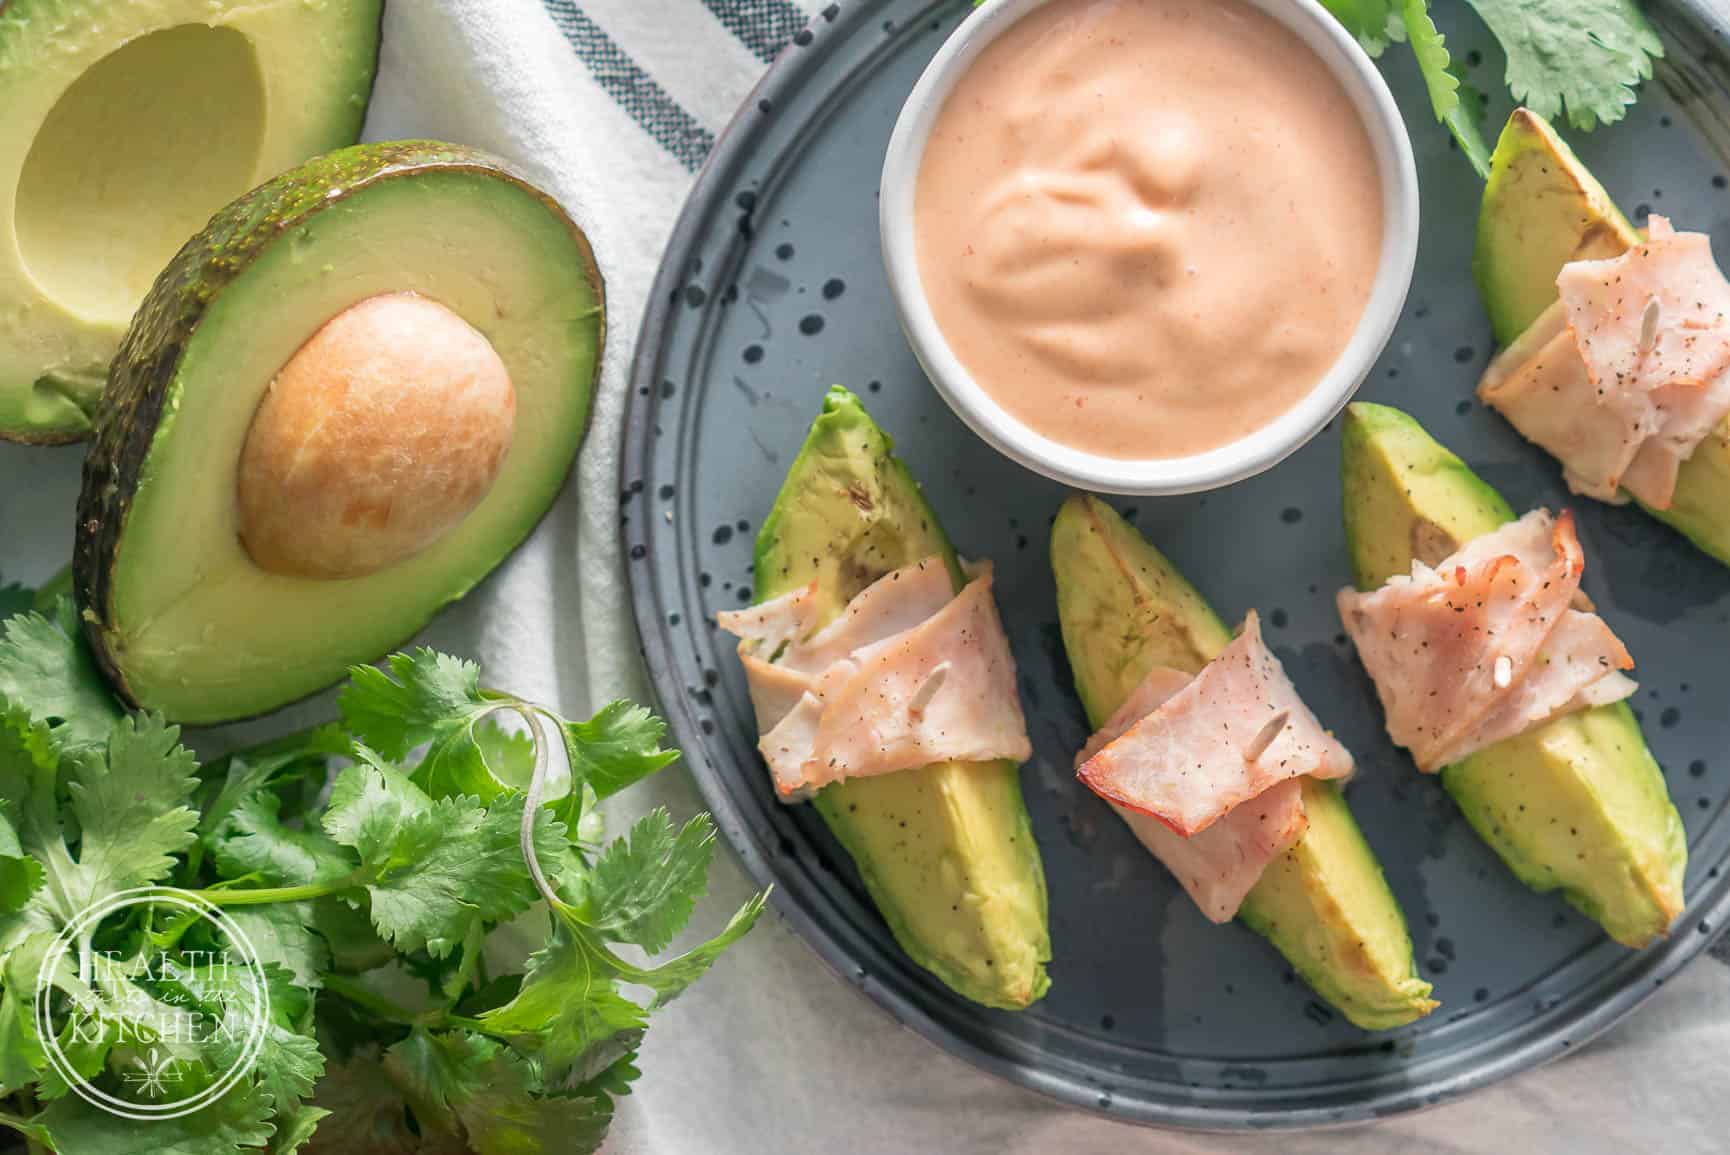 Low-Carb Turkey Wrapped Avocado Wedges with Sriracha Mayo Dip